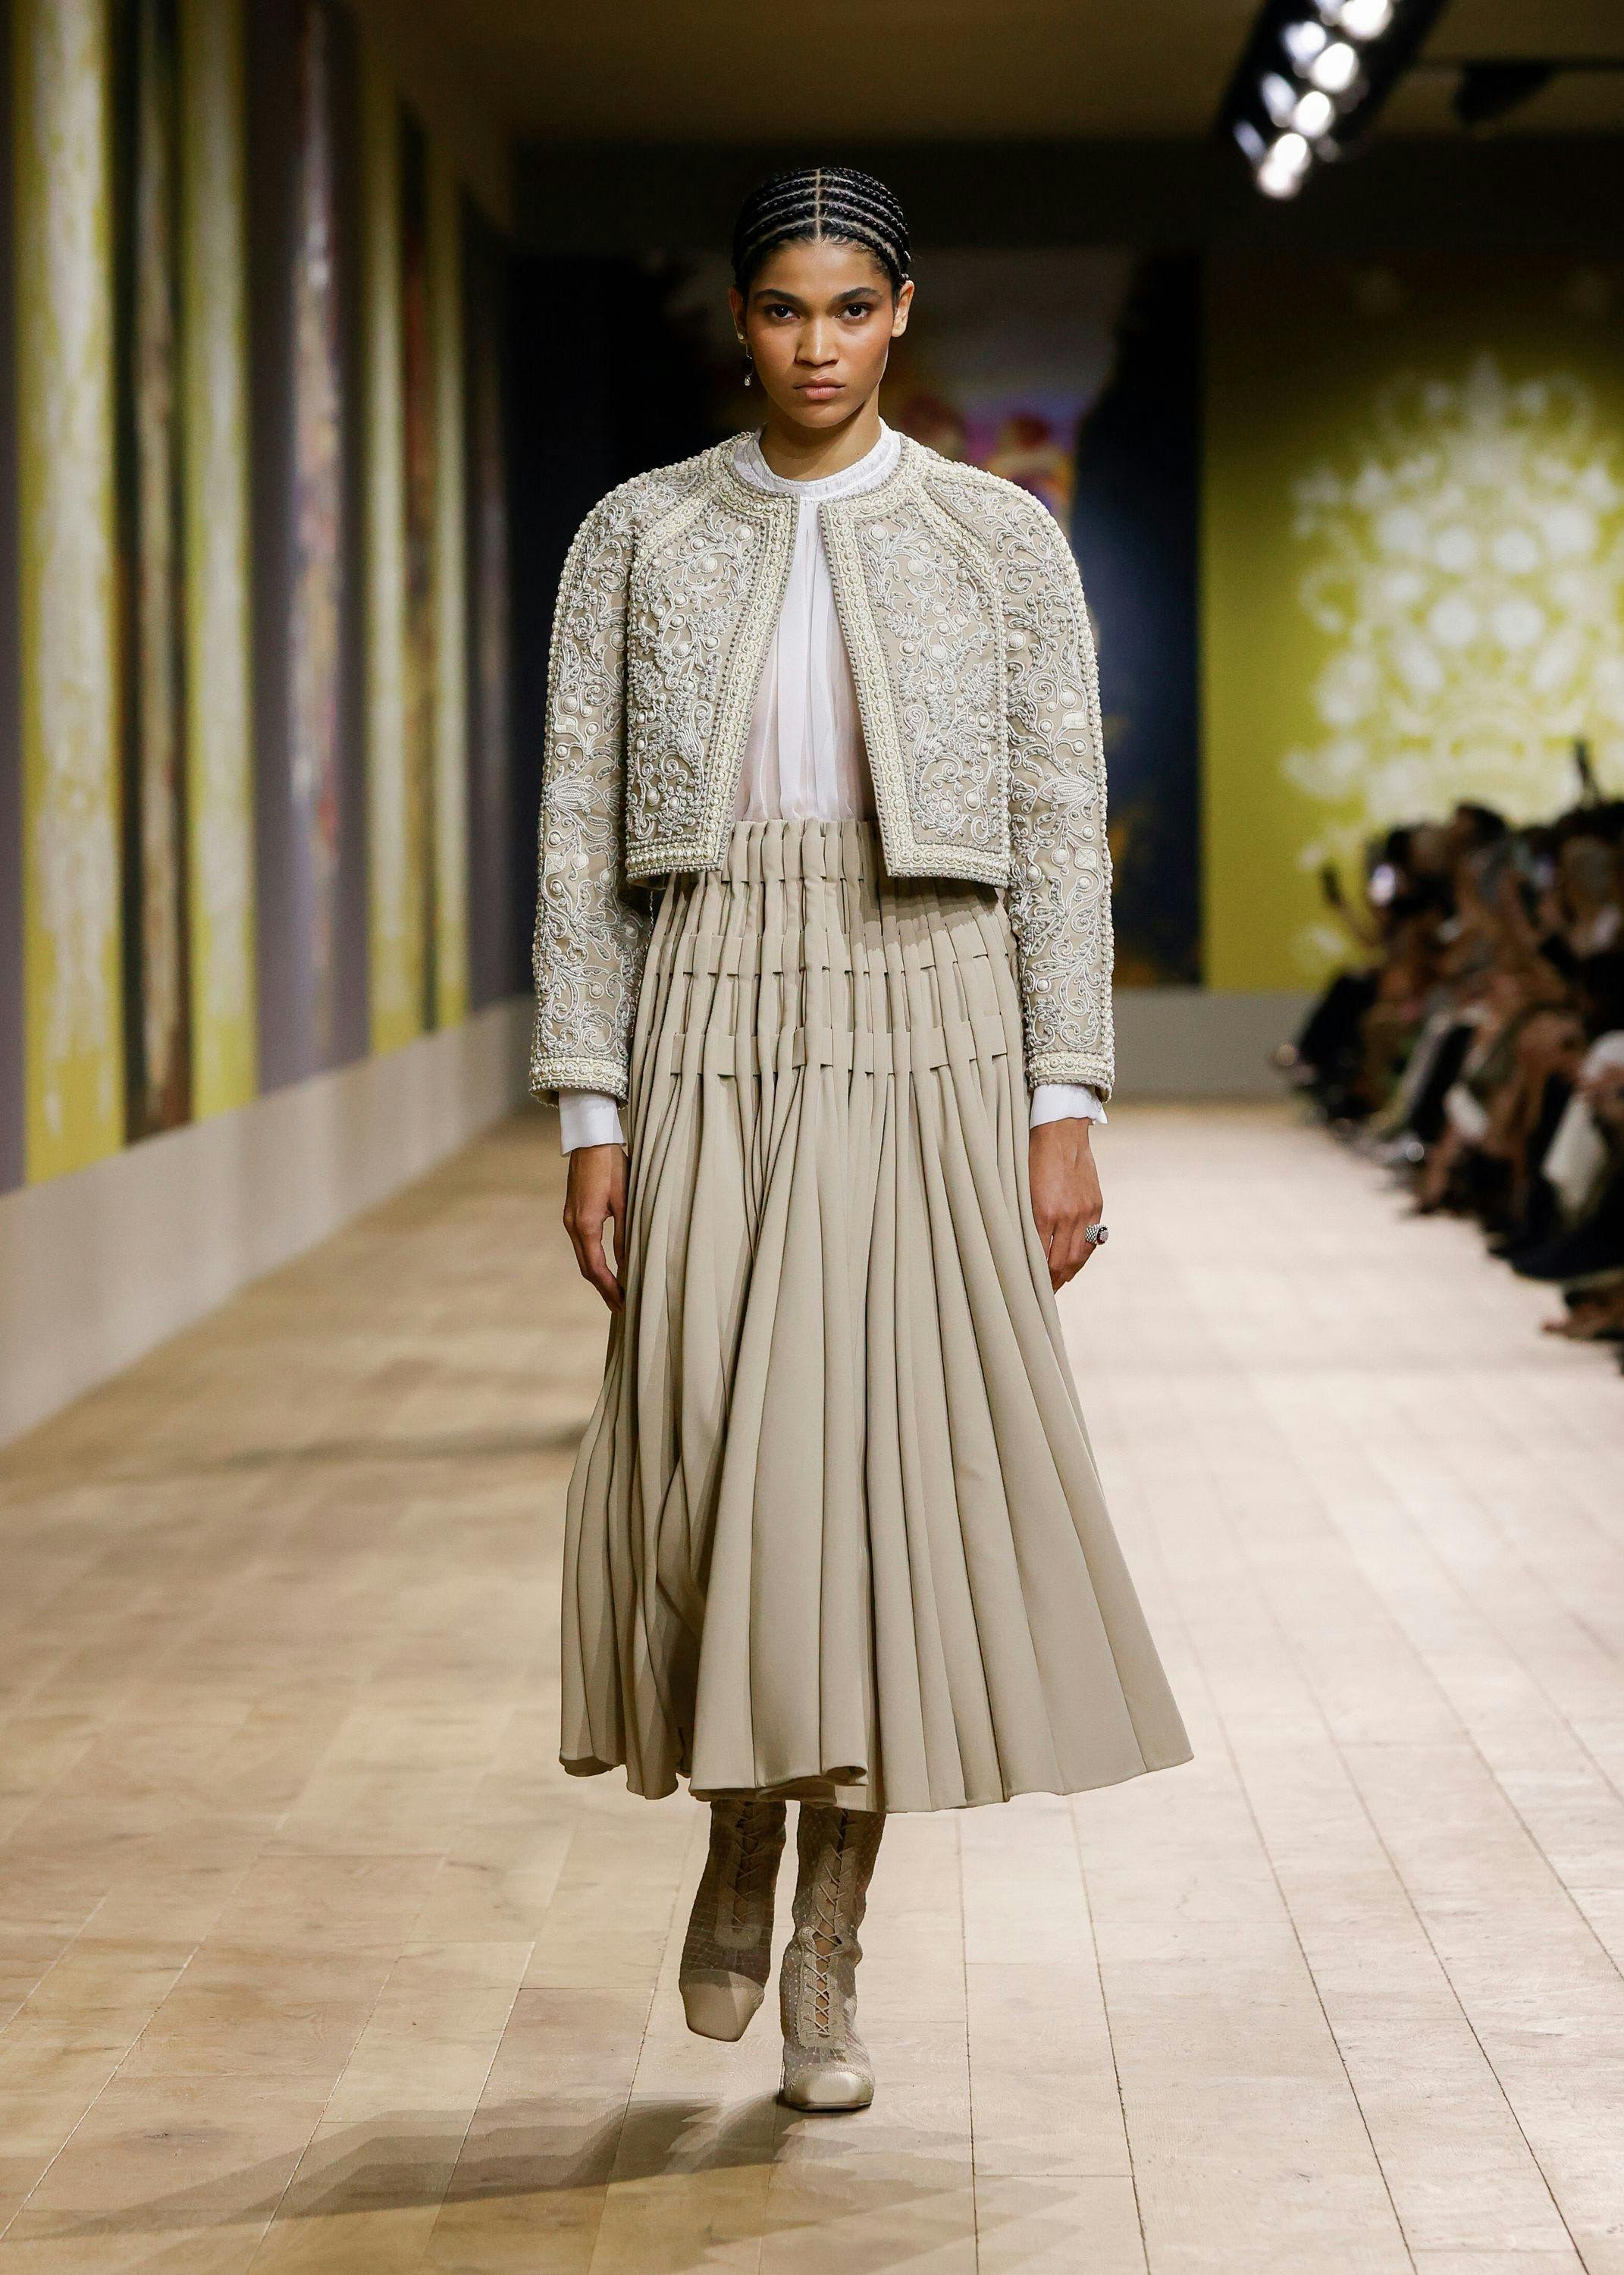 Model walking the Dior runway wearing an embroidered jacket and tan pleated skirt.